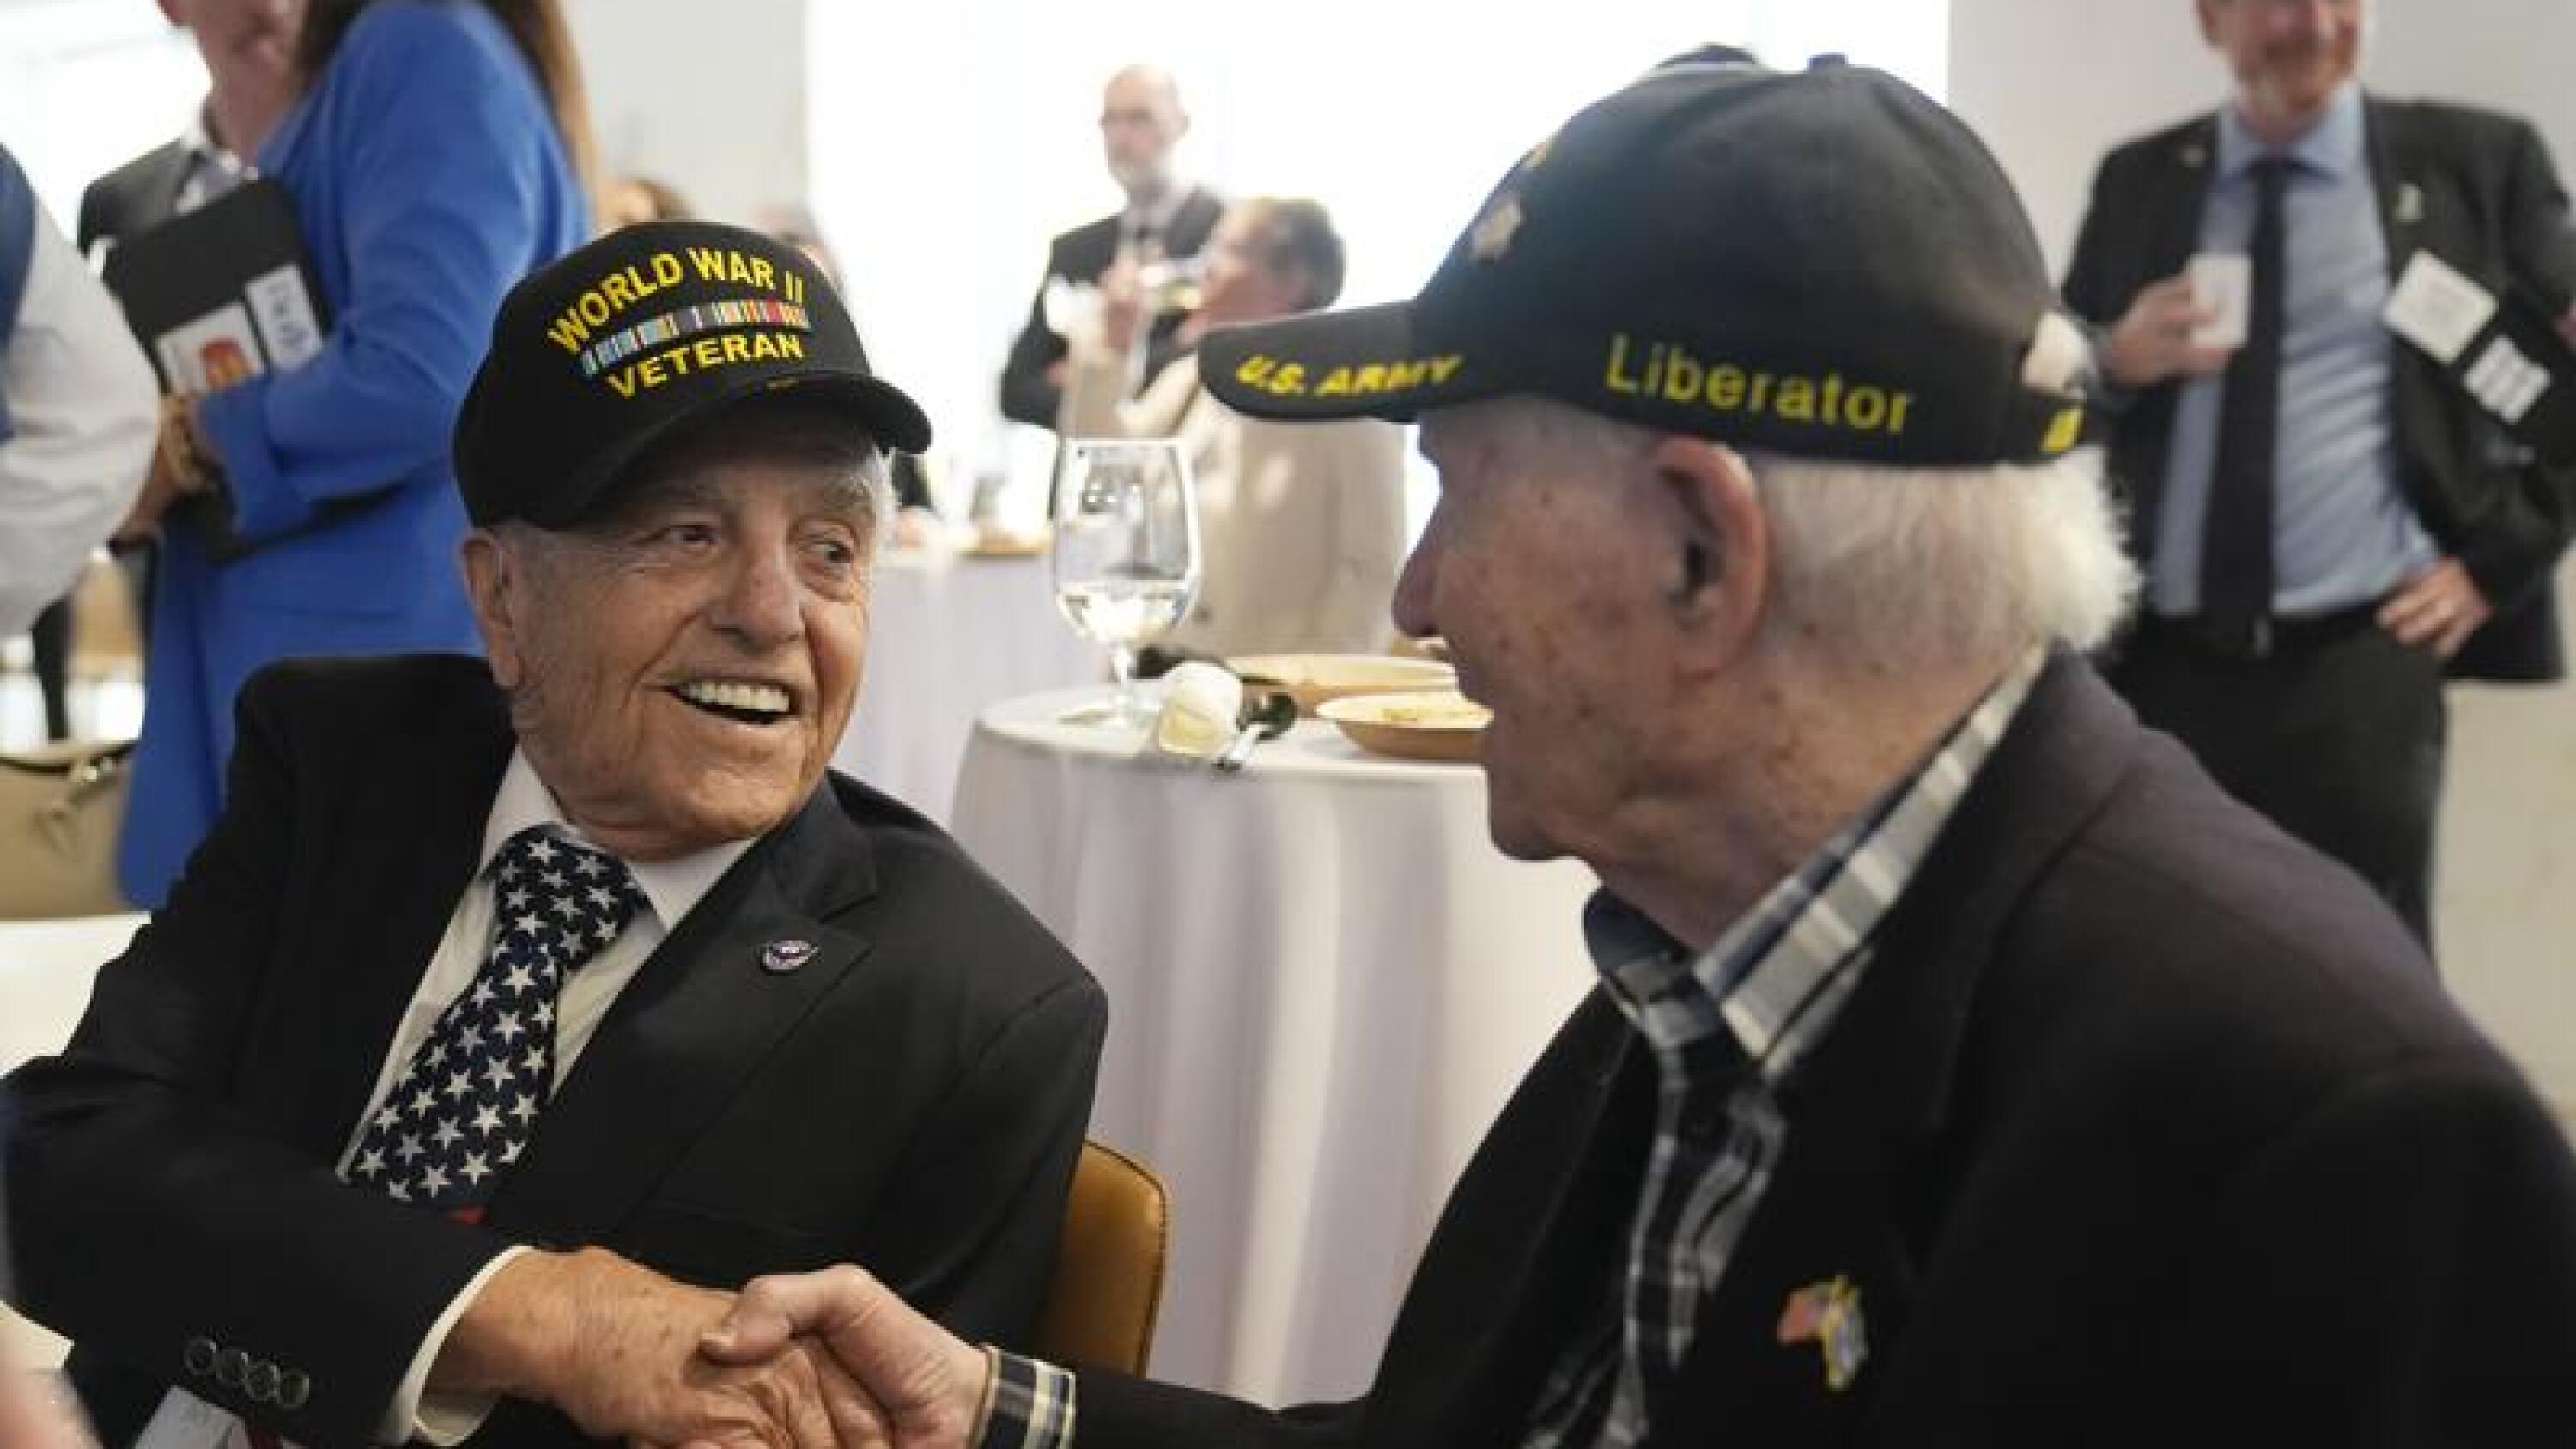 American veterans depart for France as part of 80th anniversary of D-Day